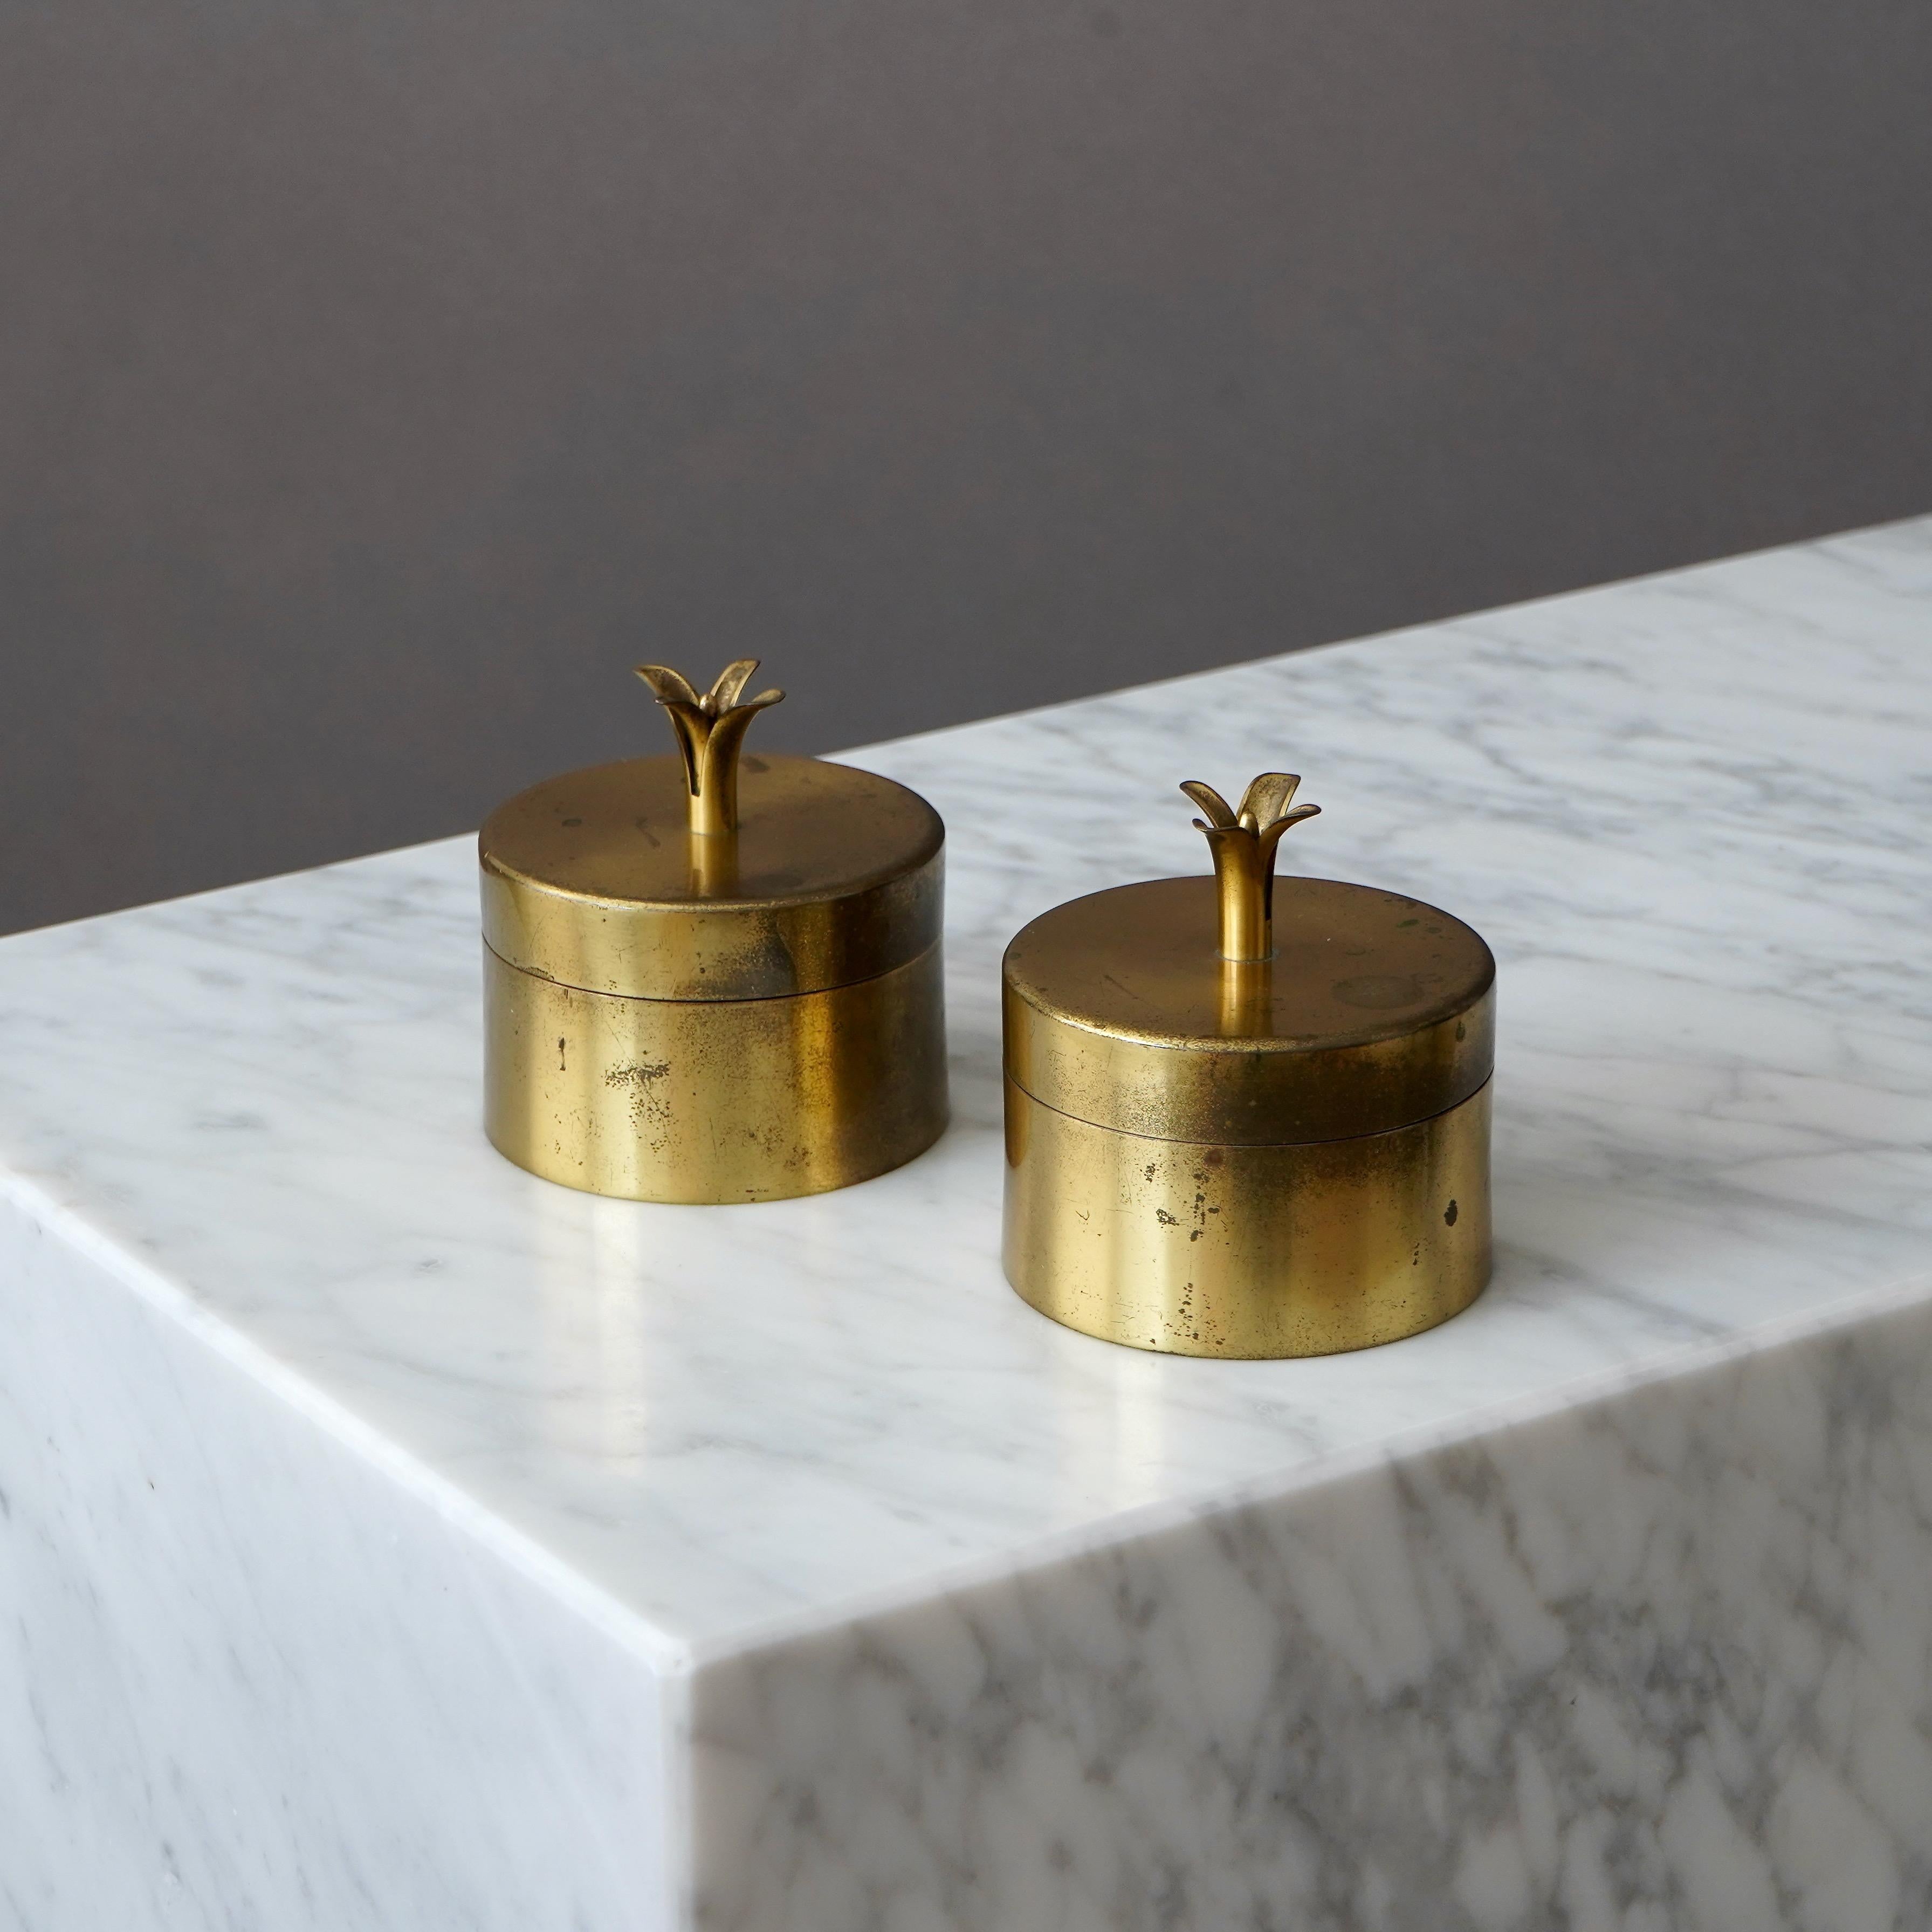 A pair of beautiful brass jars with amazing patina. Inside with glass inserts. The lid adorned with a knob in the shape of a lily (just like the famous 'Liljan' candle holders). 

Designed by Ivar Ålenius Björk for Ystad Metall, Sweden,